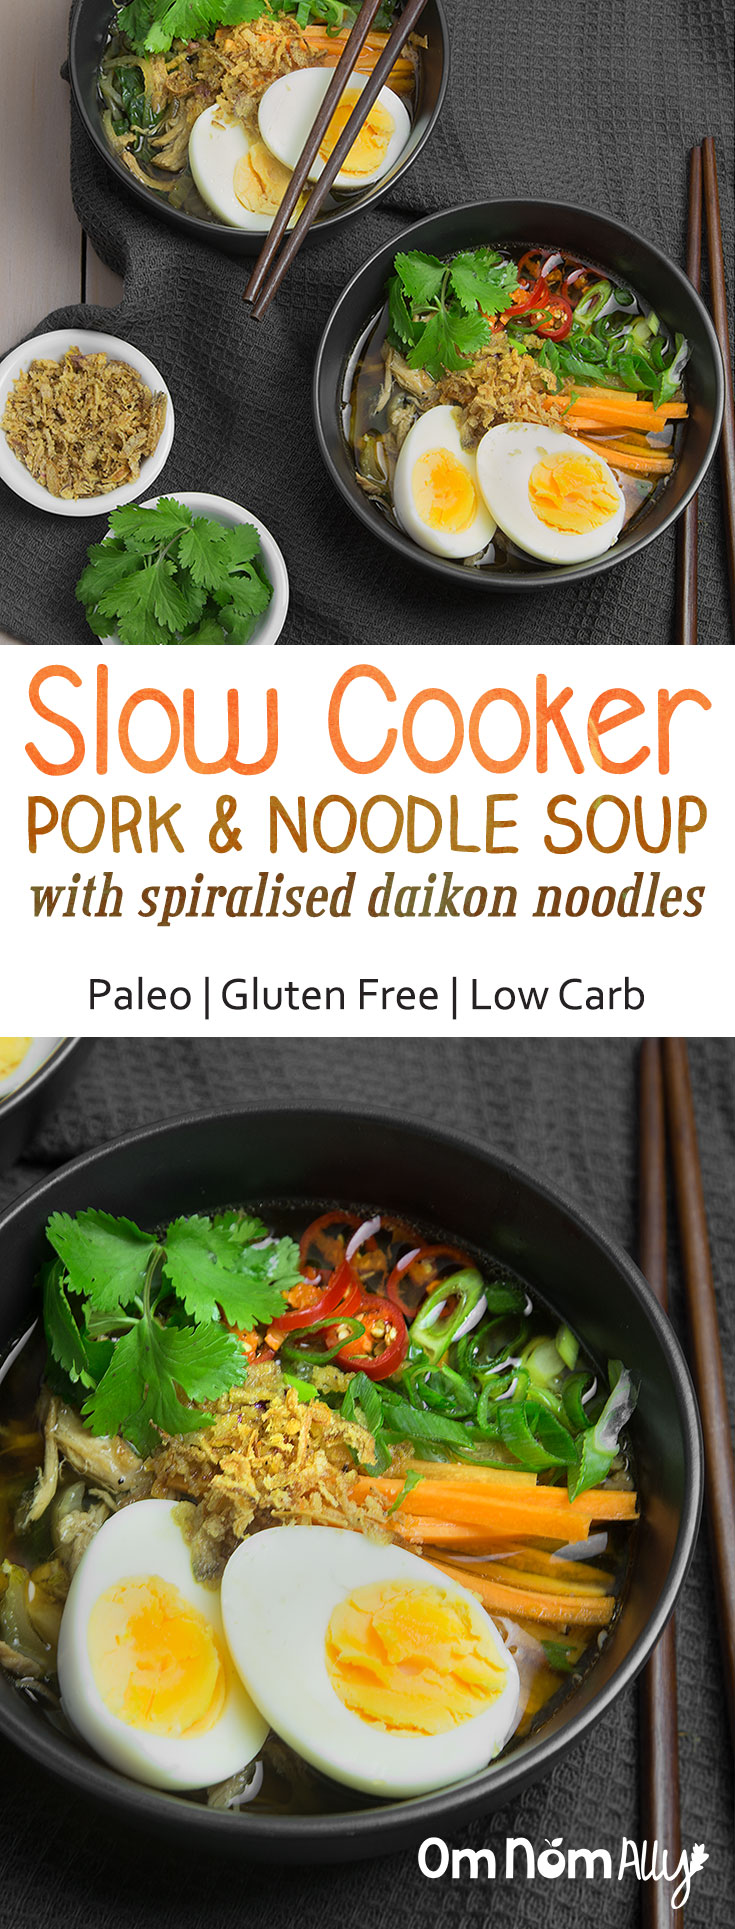 Slow Cooker (Paleo) Pork Noodle Soup with Spiralised Daikon Noodles @OmNomAlly #Glutenfree #Paleo #Low Carb. This slow cooker soup pork and noodle is a joy to come home too after a long day and a pleasure to eat due to it’s slippery, gelatinous mouth-feel and aromatic spices